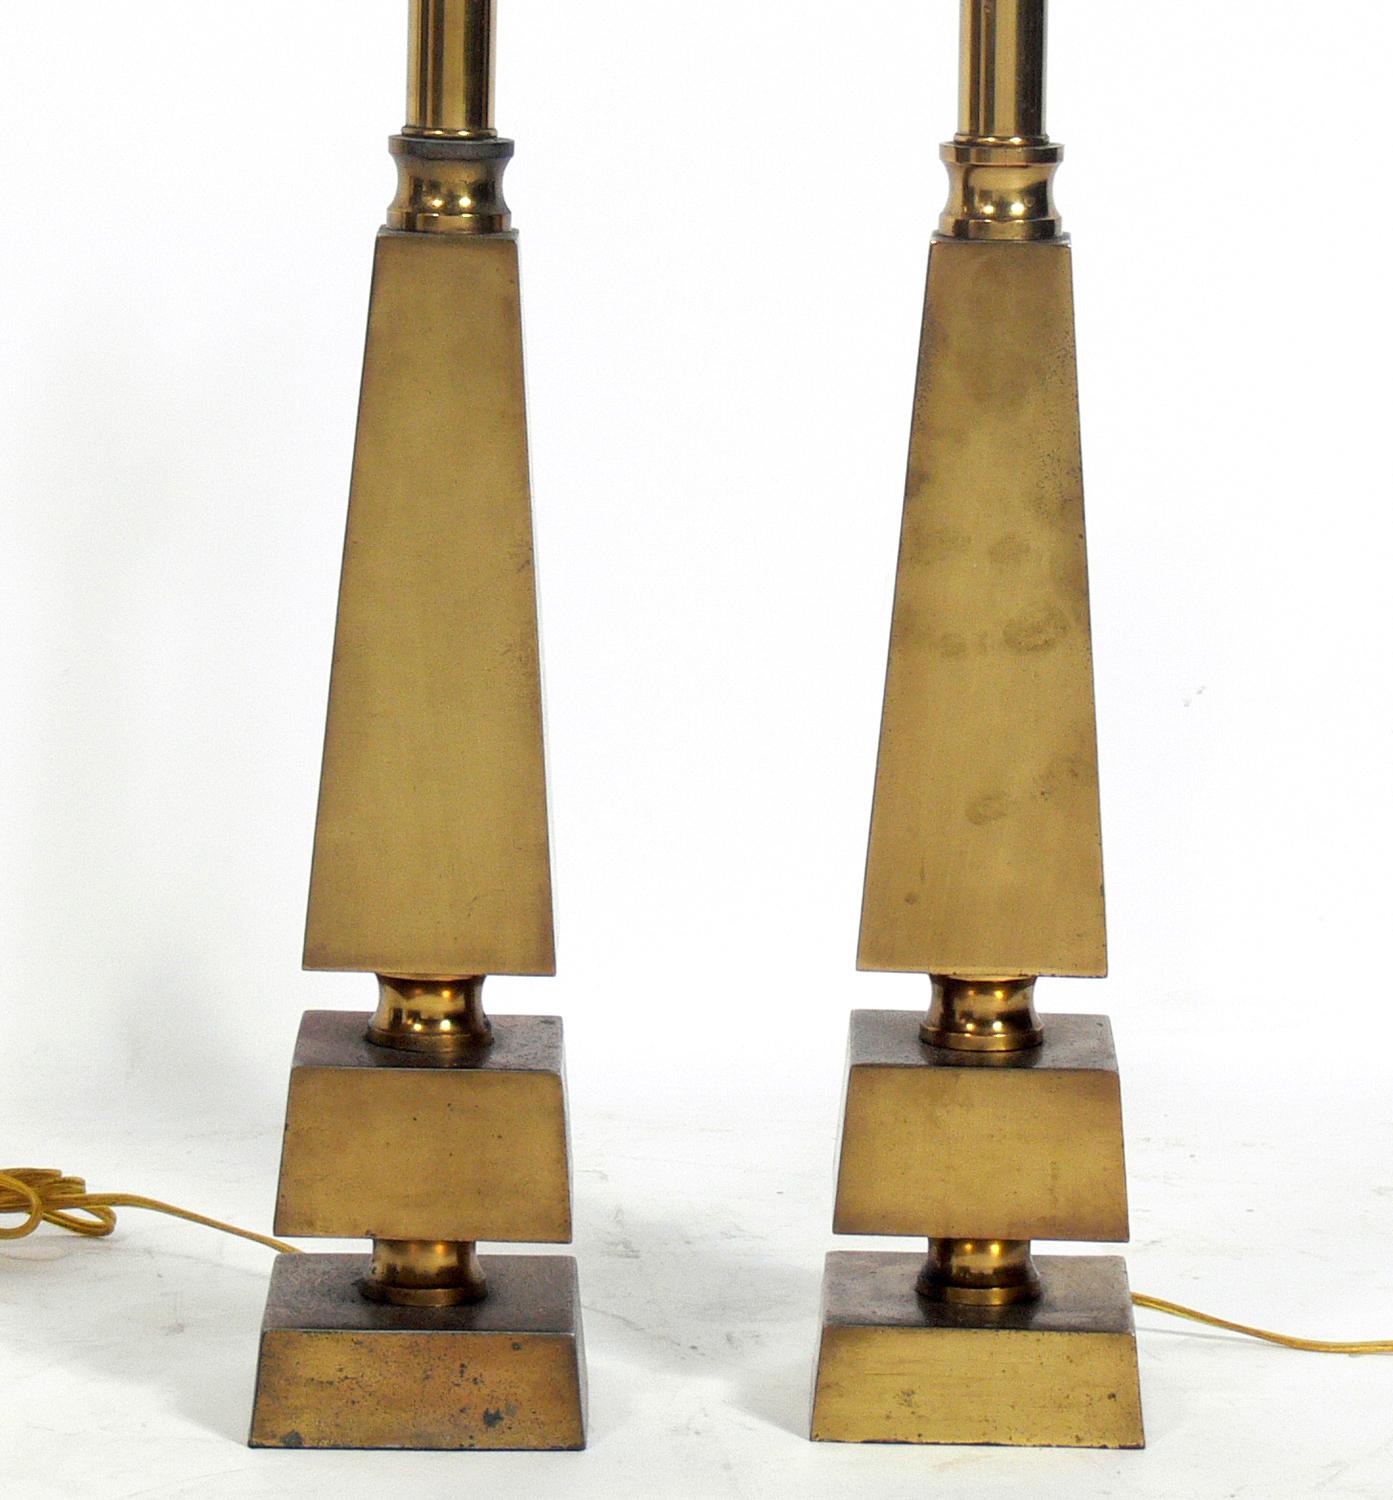 Pair of brass Obelisk lamps, designed by Gilbert Rohde for the Mutual Sunset Lamp Company, circa 1930s. Signed with the manufacturer's stamp underneath. They have been rewired and are ready to use. They retain their warm original patina with age